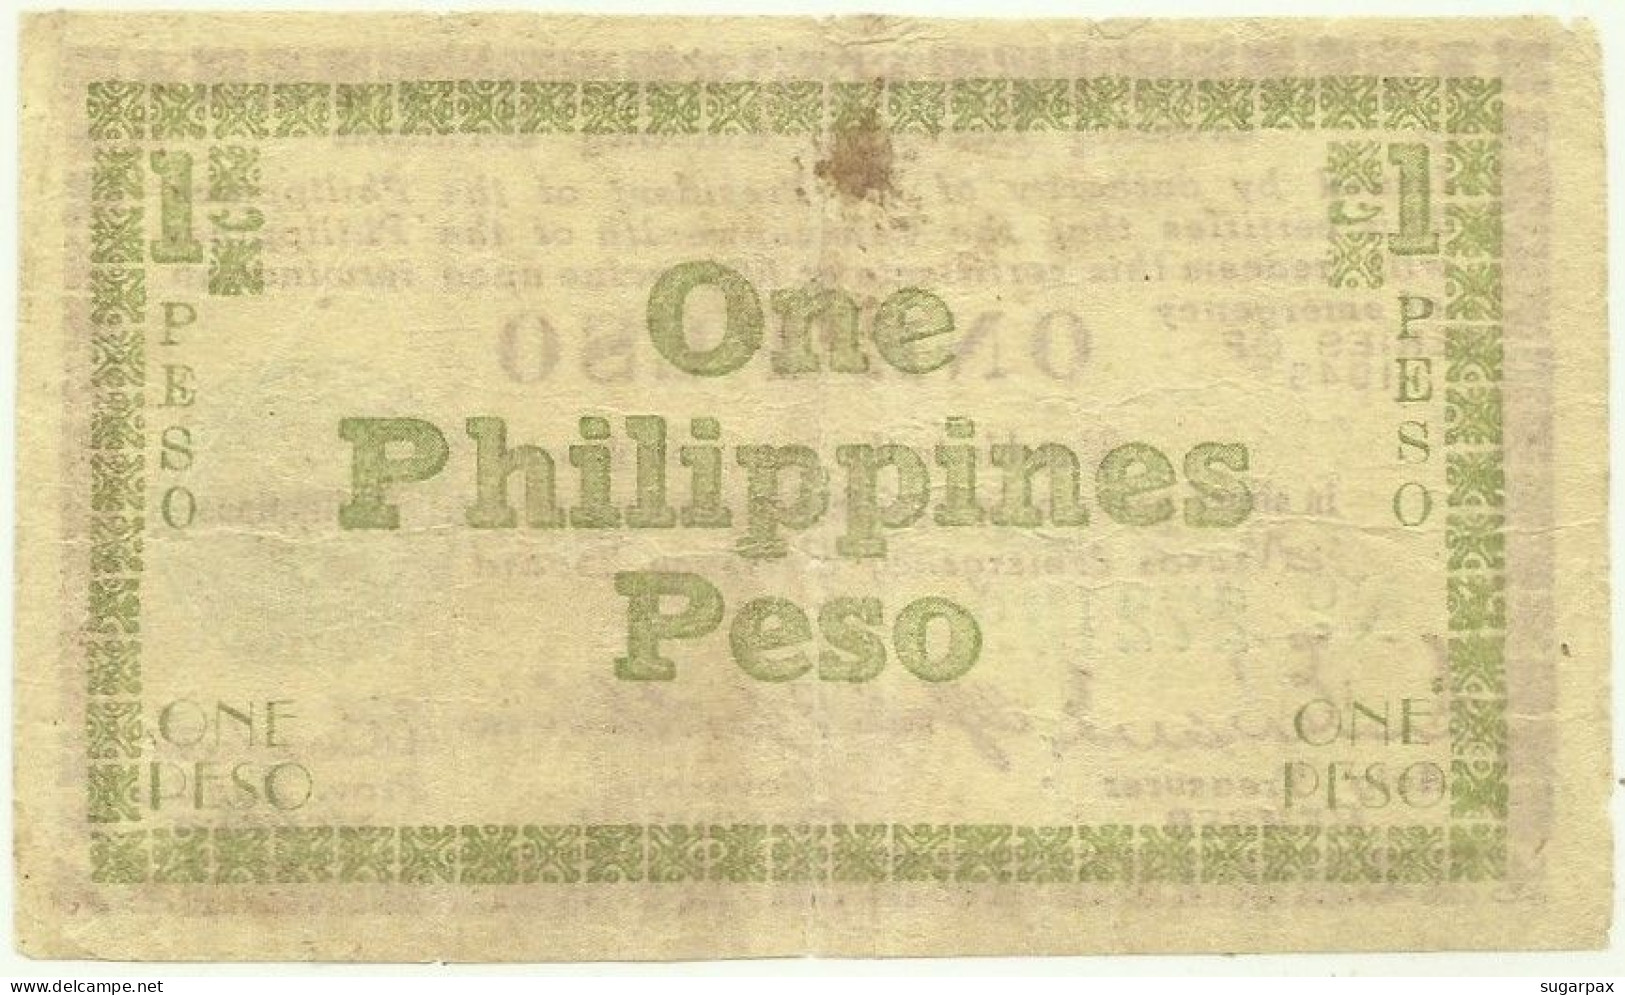 PHILIPPINES - 1 Peso - 1943 - Pick S 661 - Serie A2 - Negros Emergency Currency Board - Filippijnen